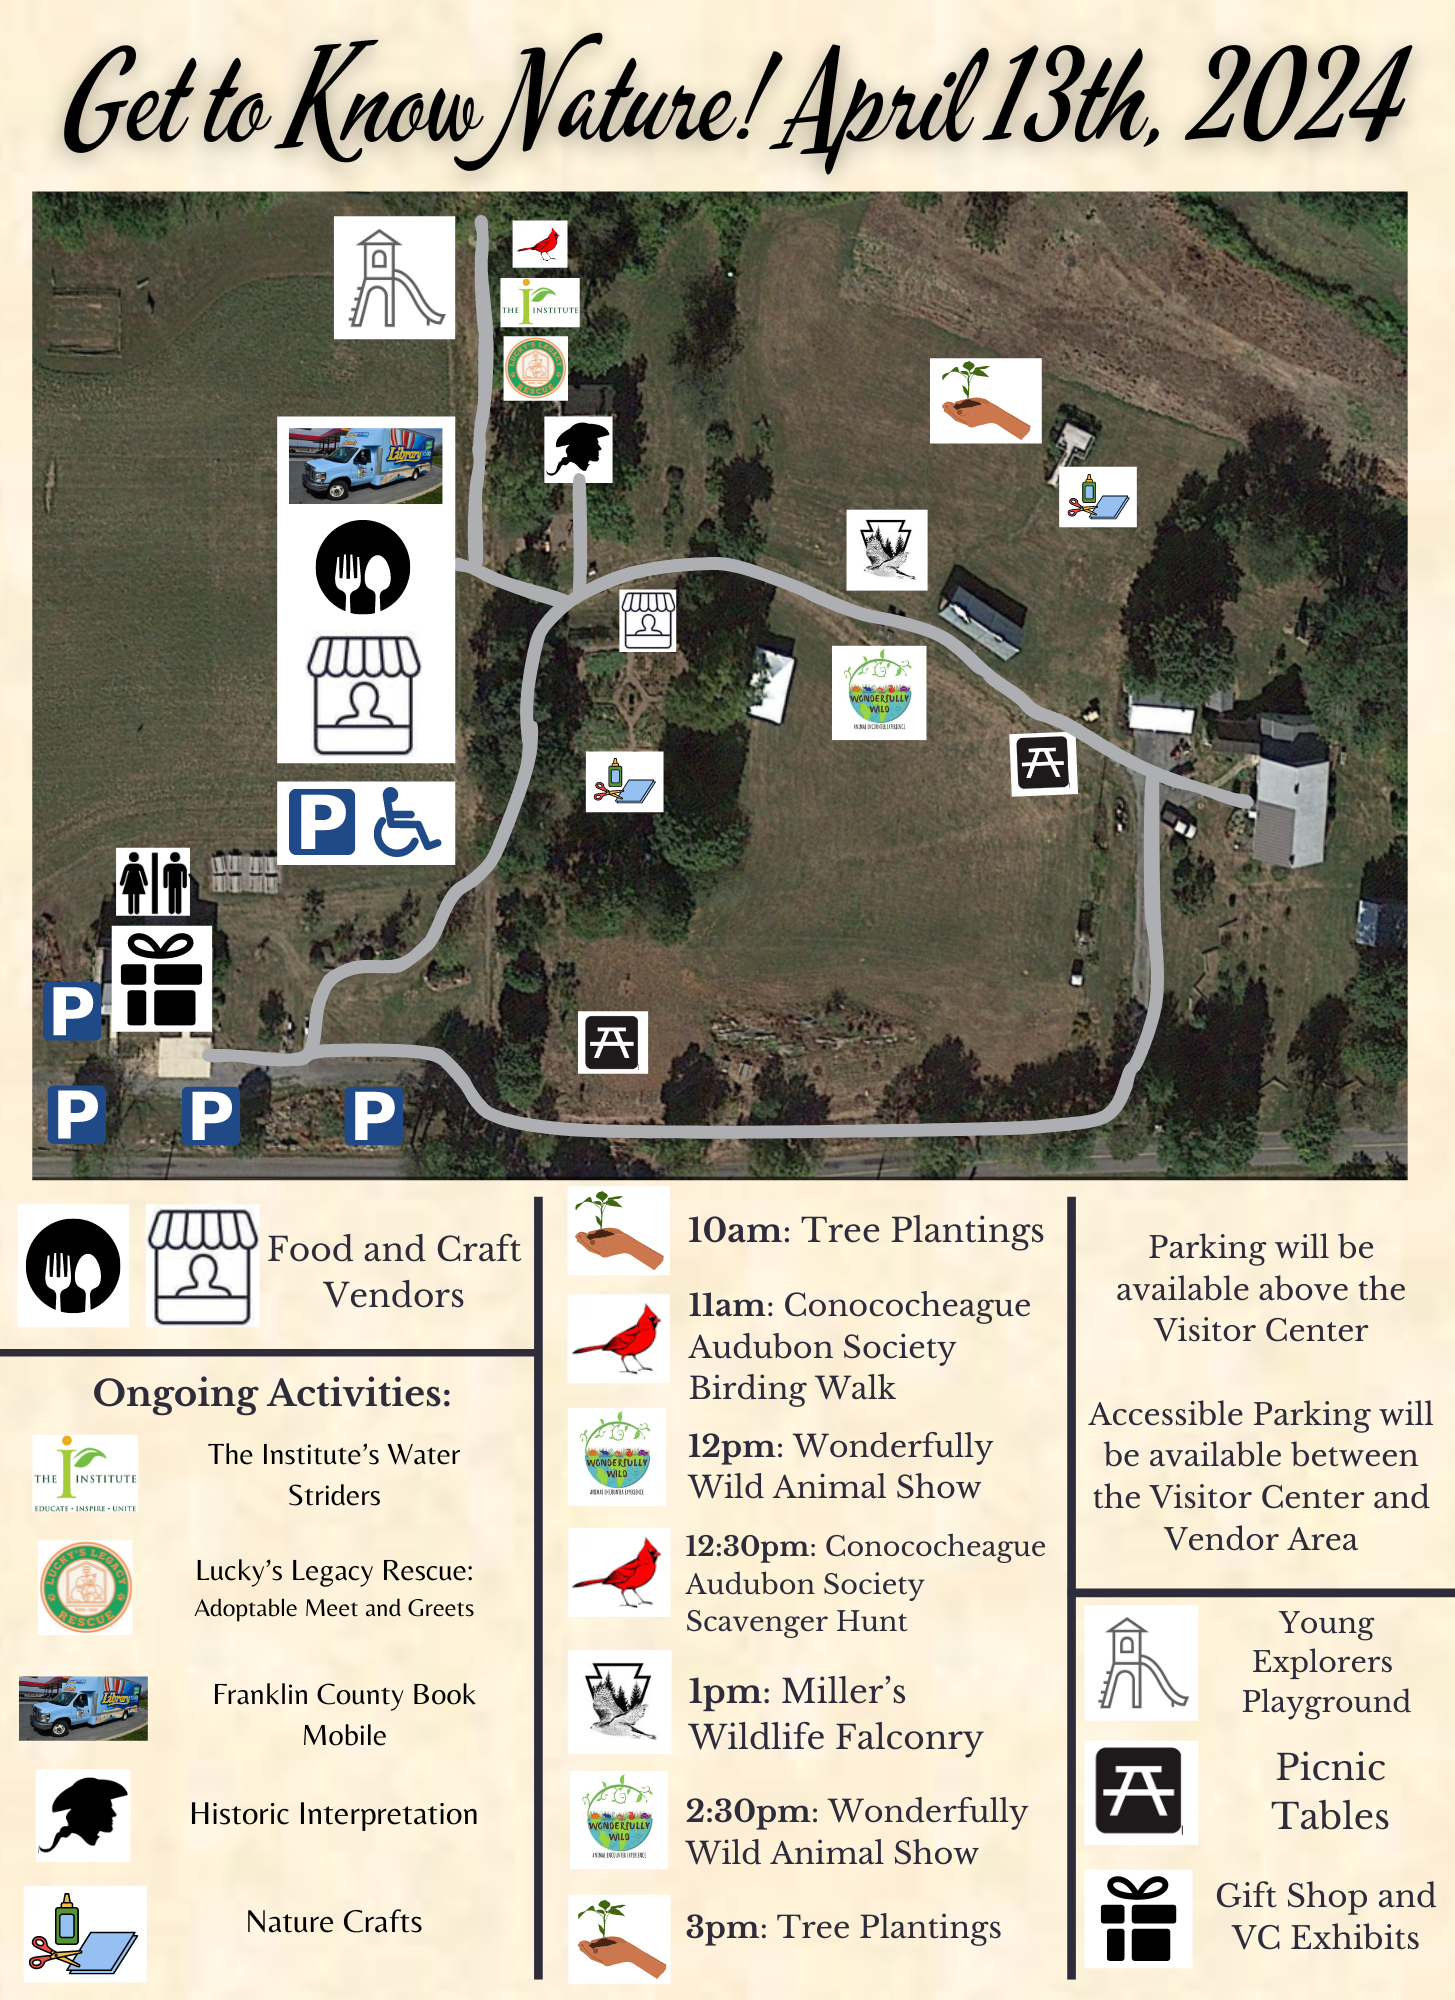 Get to Know Nature 2024 Site Map